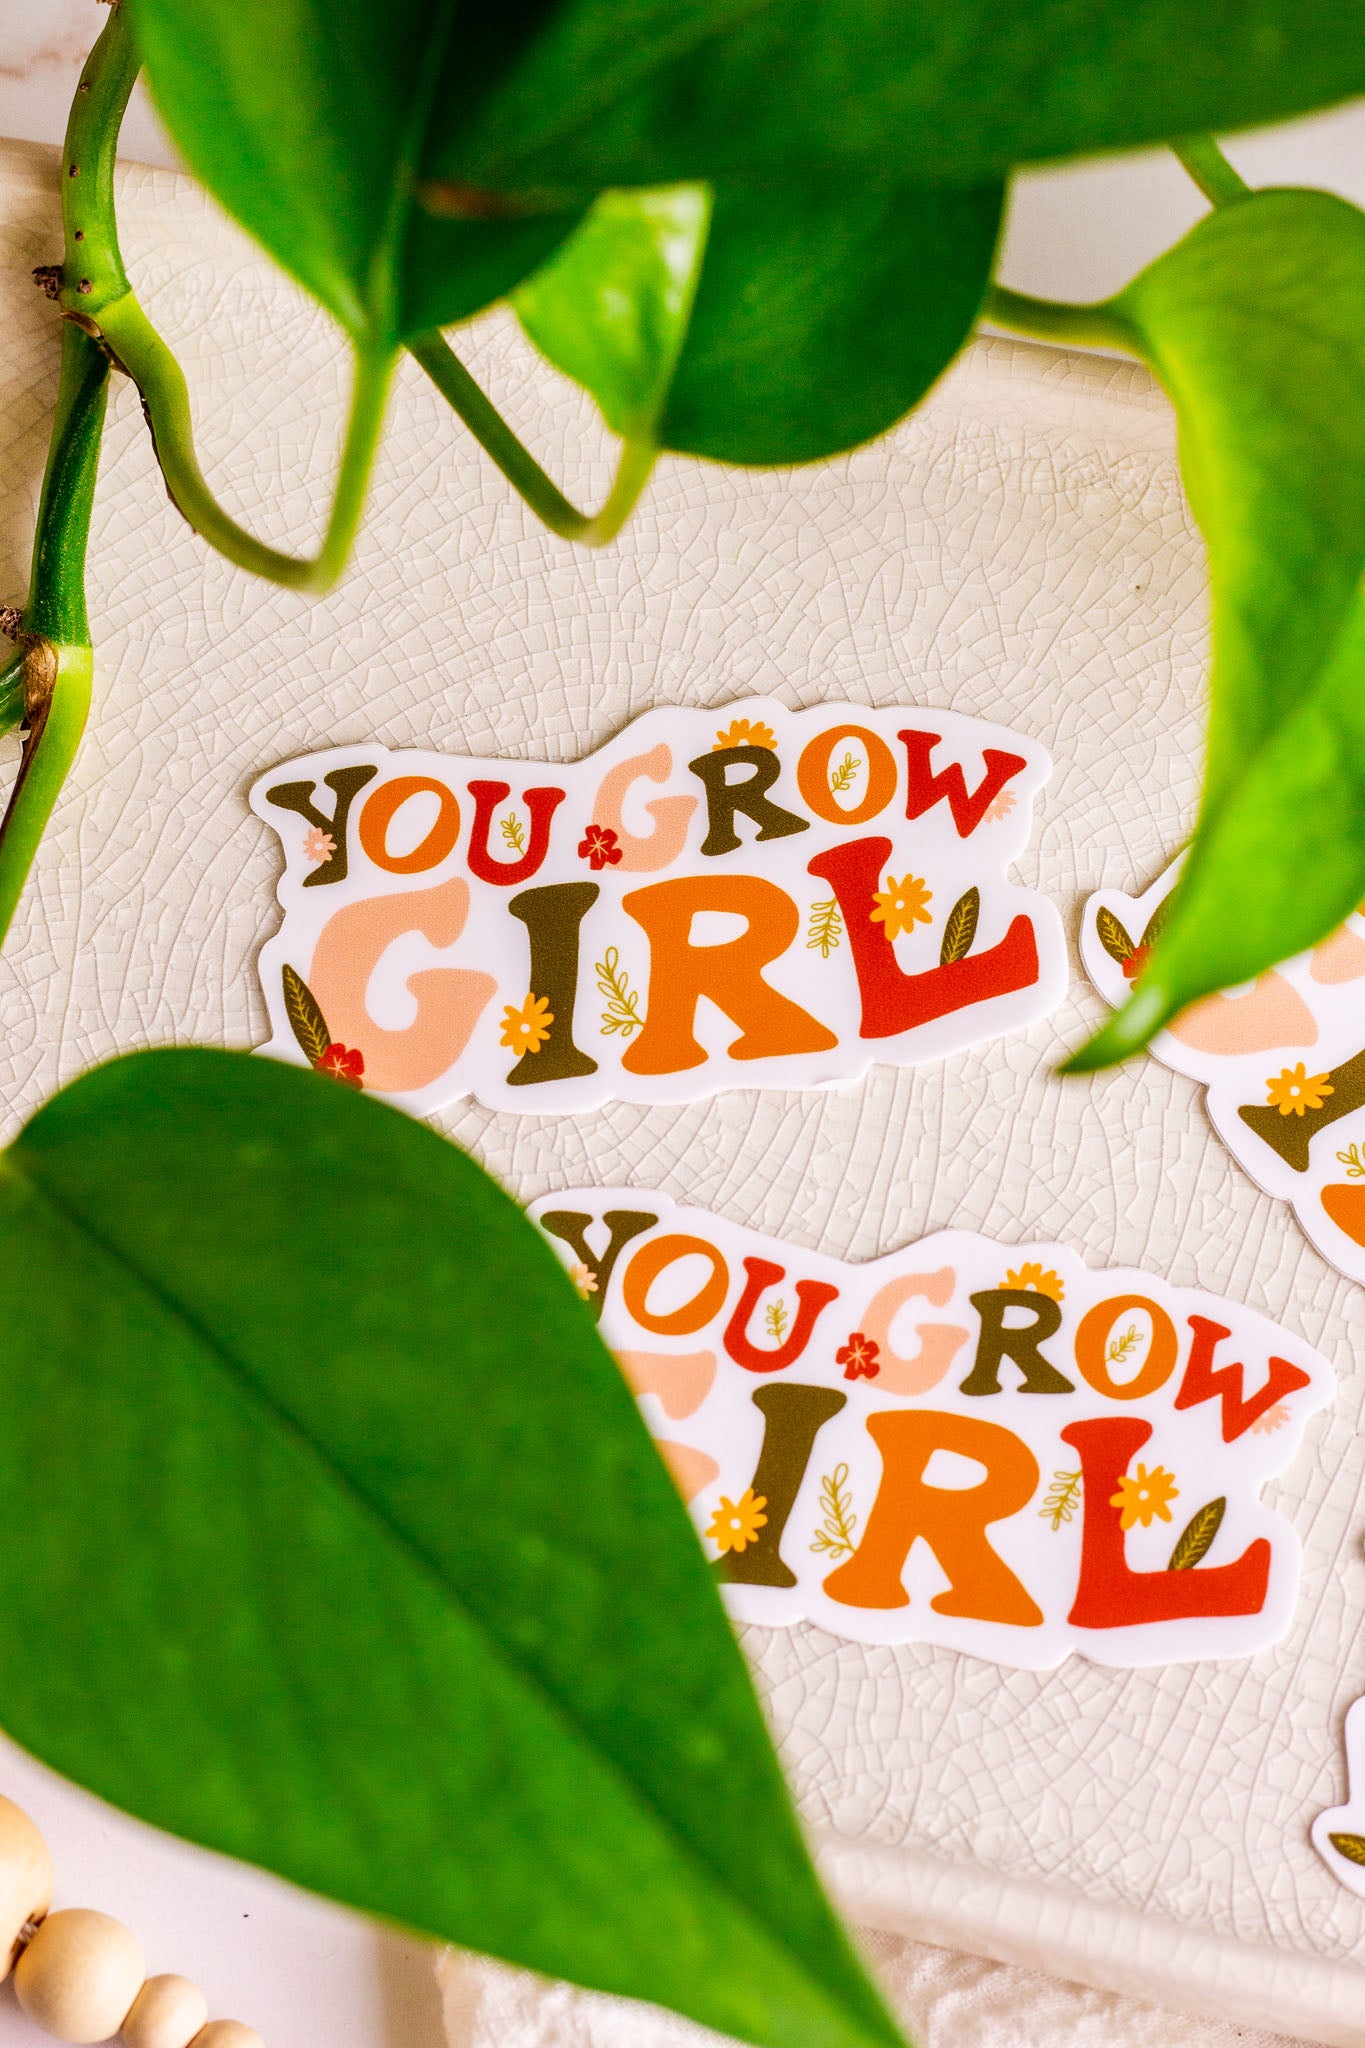 You Grow Girl Vinyl Sticker laying on a decorative tray with greenery surrounding it